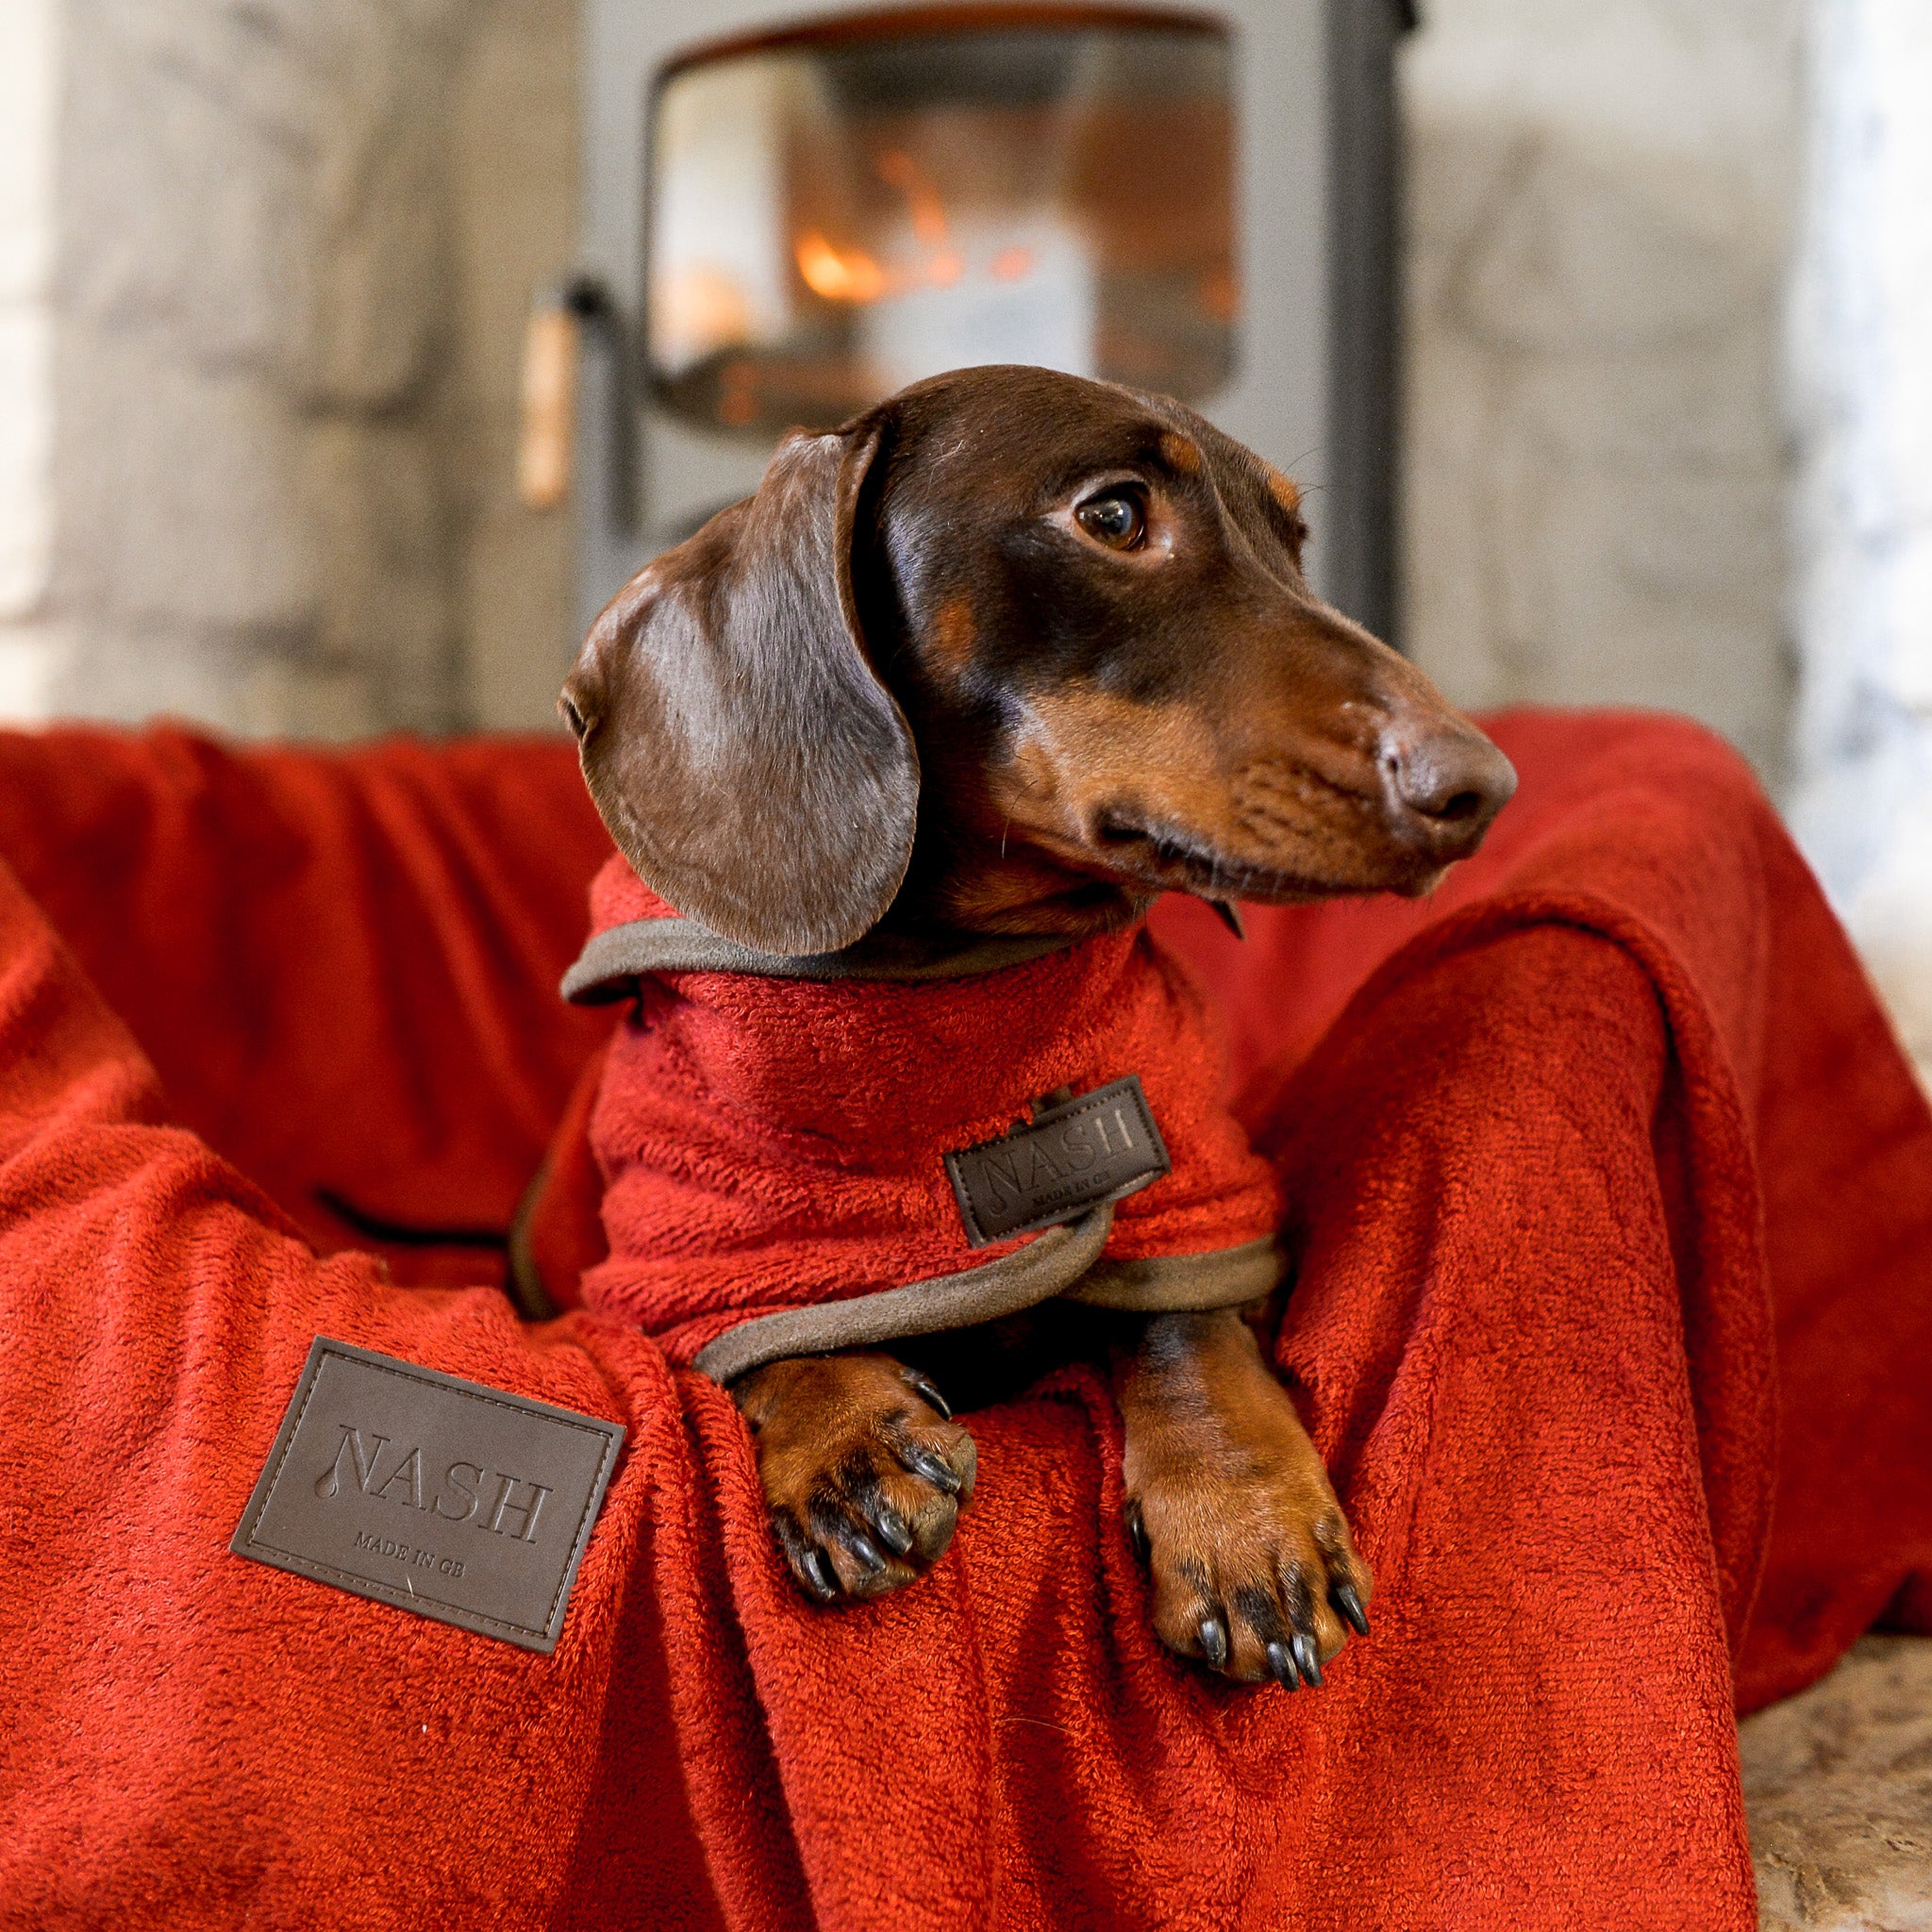 Dachshund resting in its bed in front of a fireplace. The bed has been lined with the red NASH dog bamboo throw.